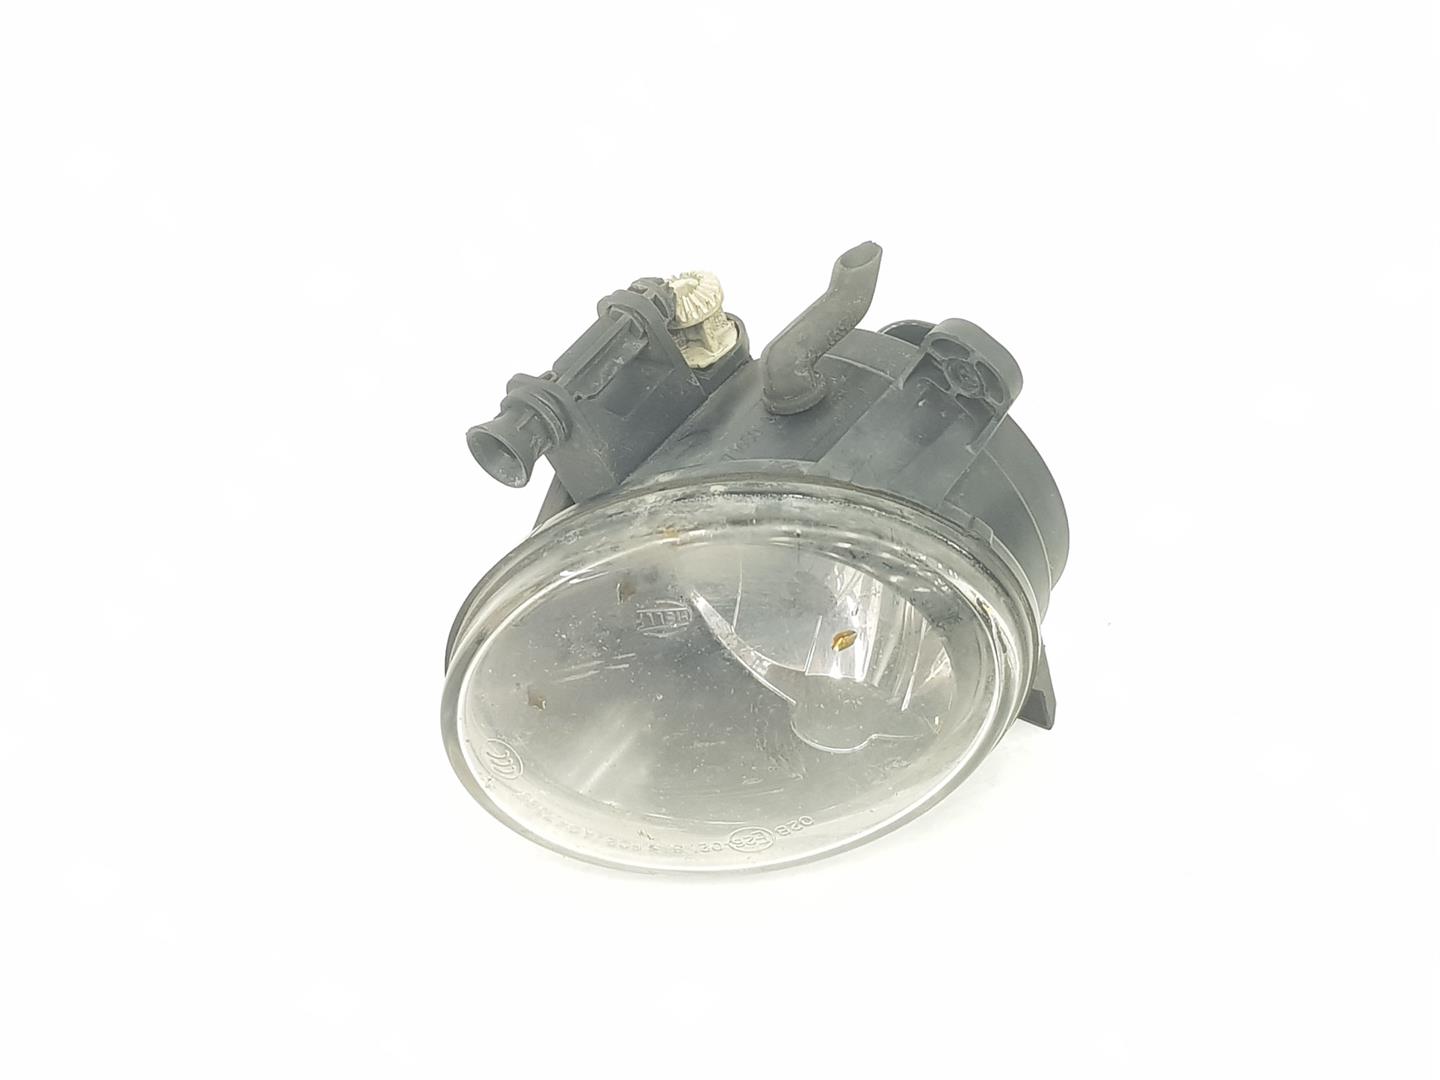 SEAT Exeo 1 generation (2009-2012) Front Right Fog Light 8T0941700A, 8T0941700A 24220850